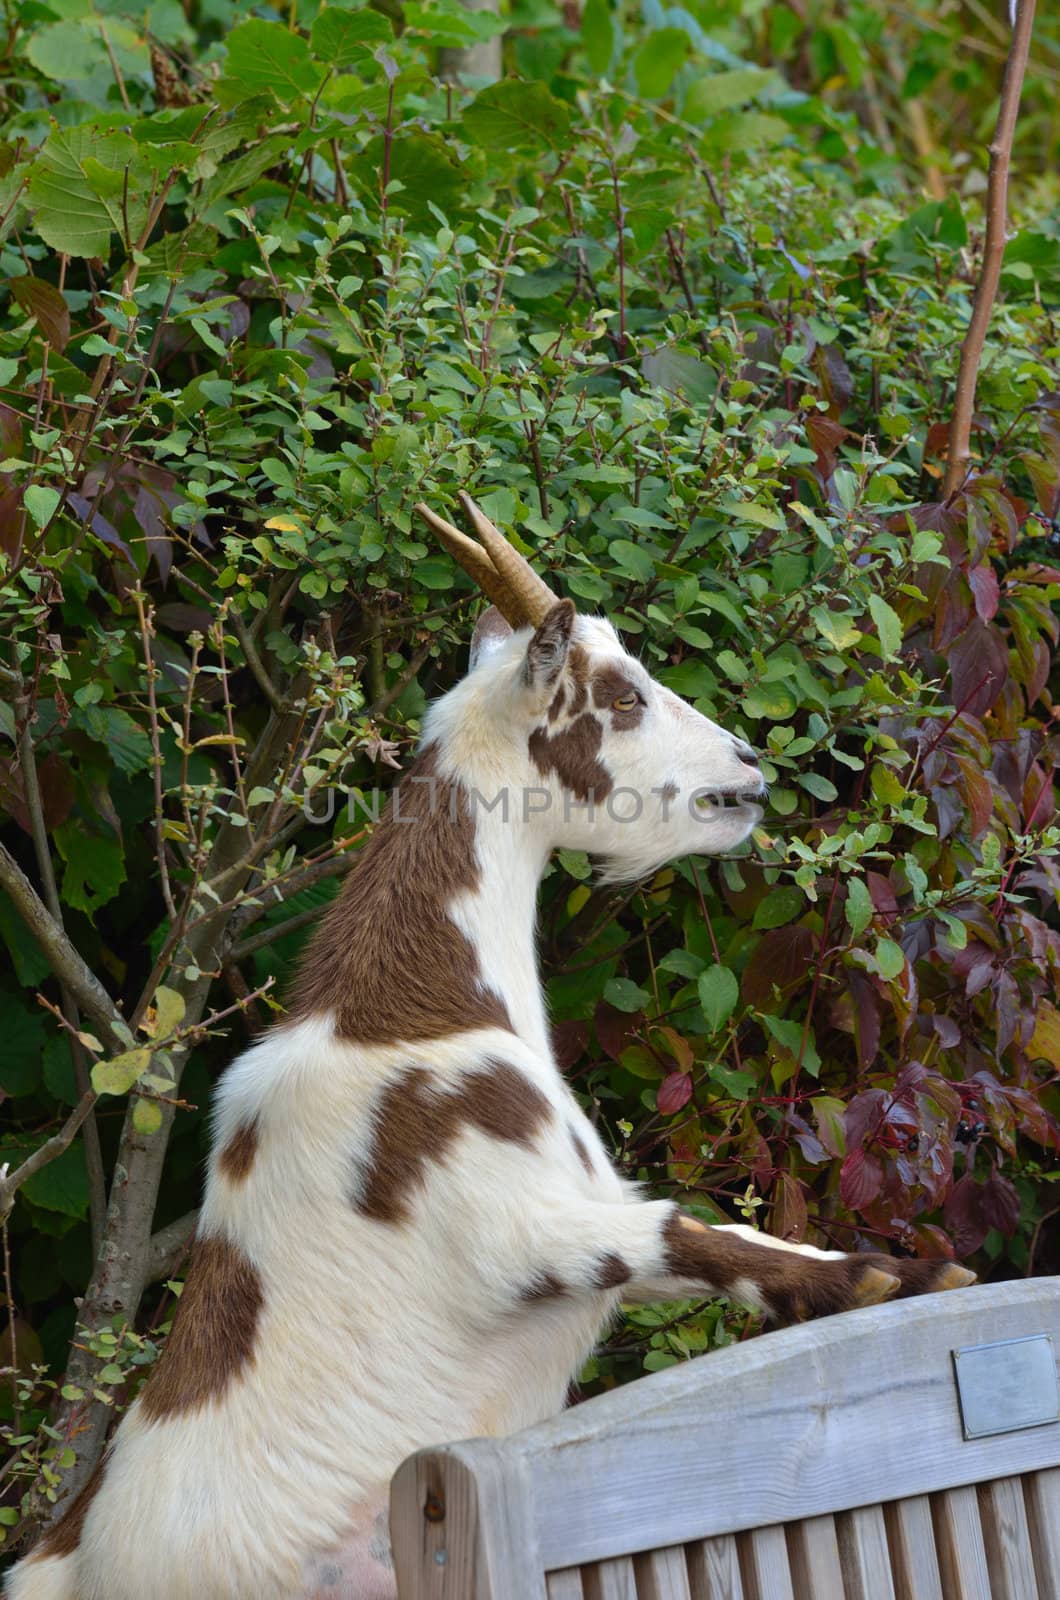 Goat standing on Bench to Feed